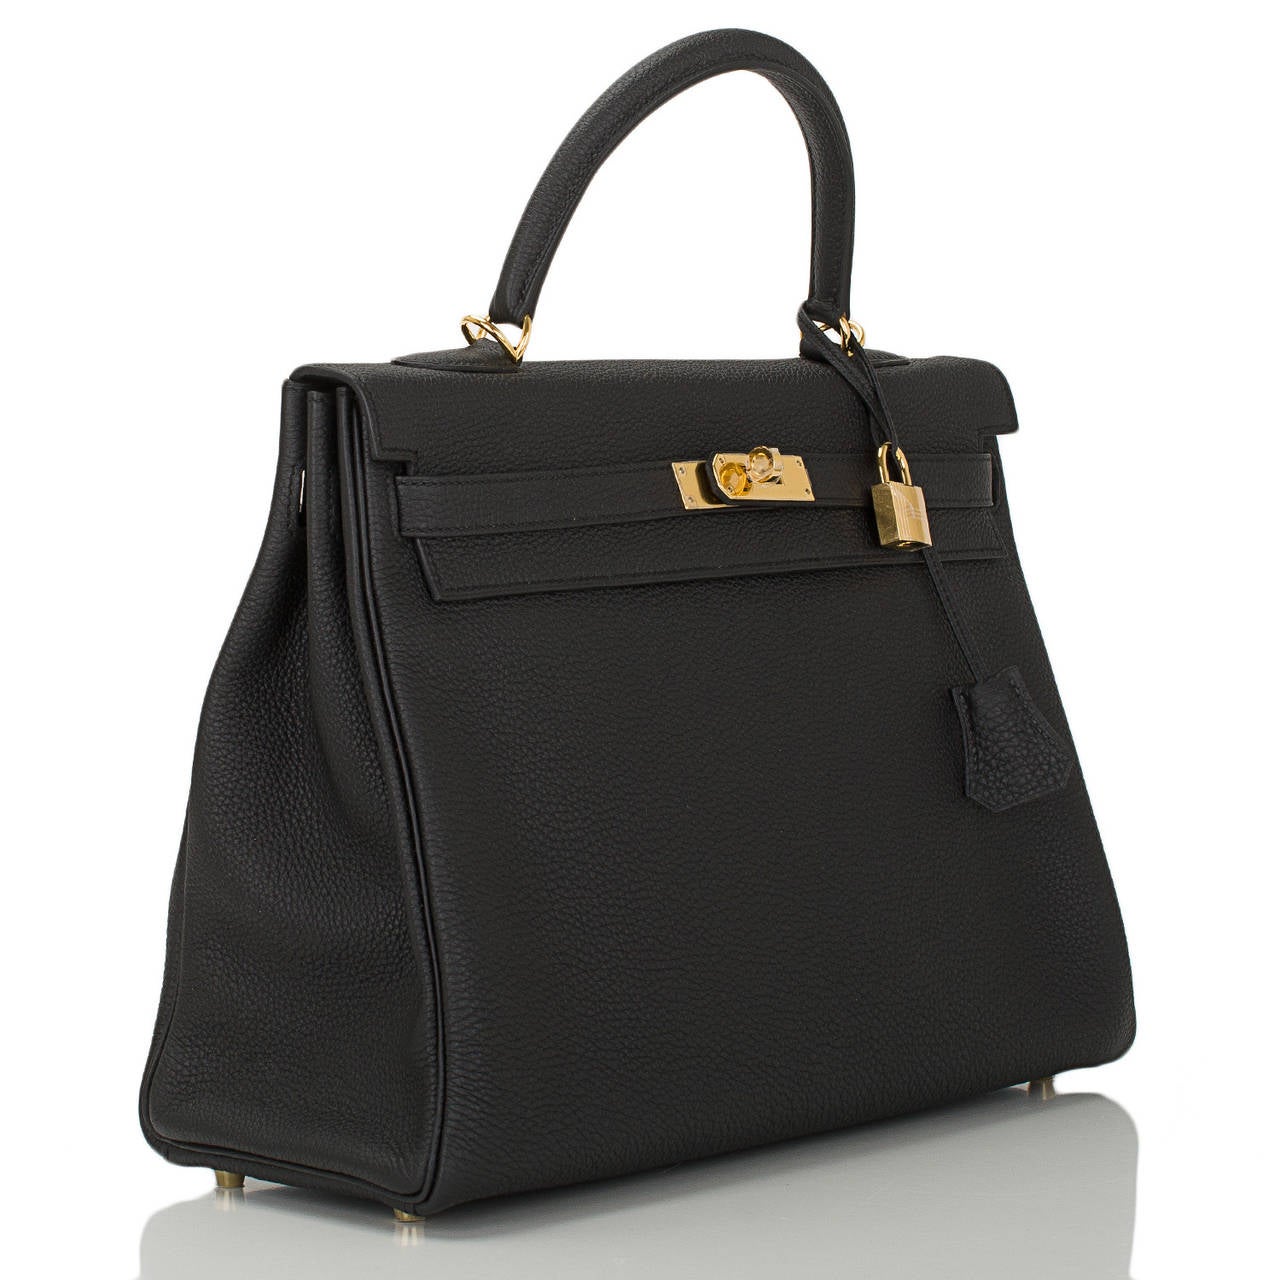 Hermes Black Kelly 35cm in rich togo (bull) leather with gold hardware.

The Hermes Kelly bag, like its sister bag -- the Birkin -- is a coveted and scarce bag. Like its muse, Grace Kelly, this bag is the definition of timeless elegance. The